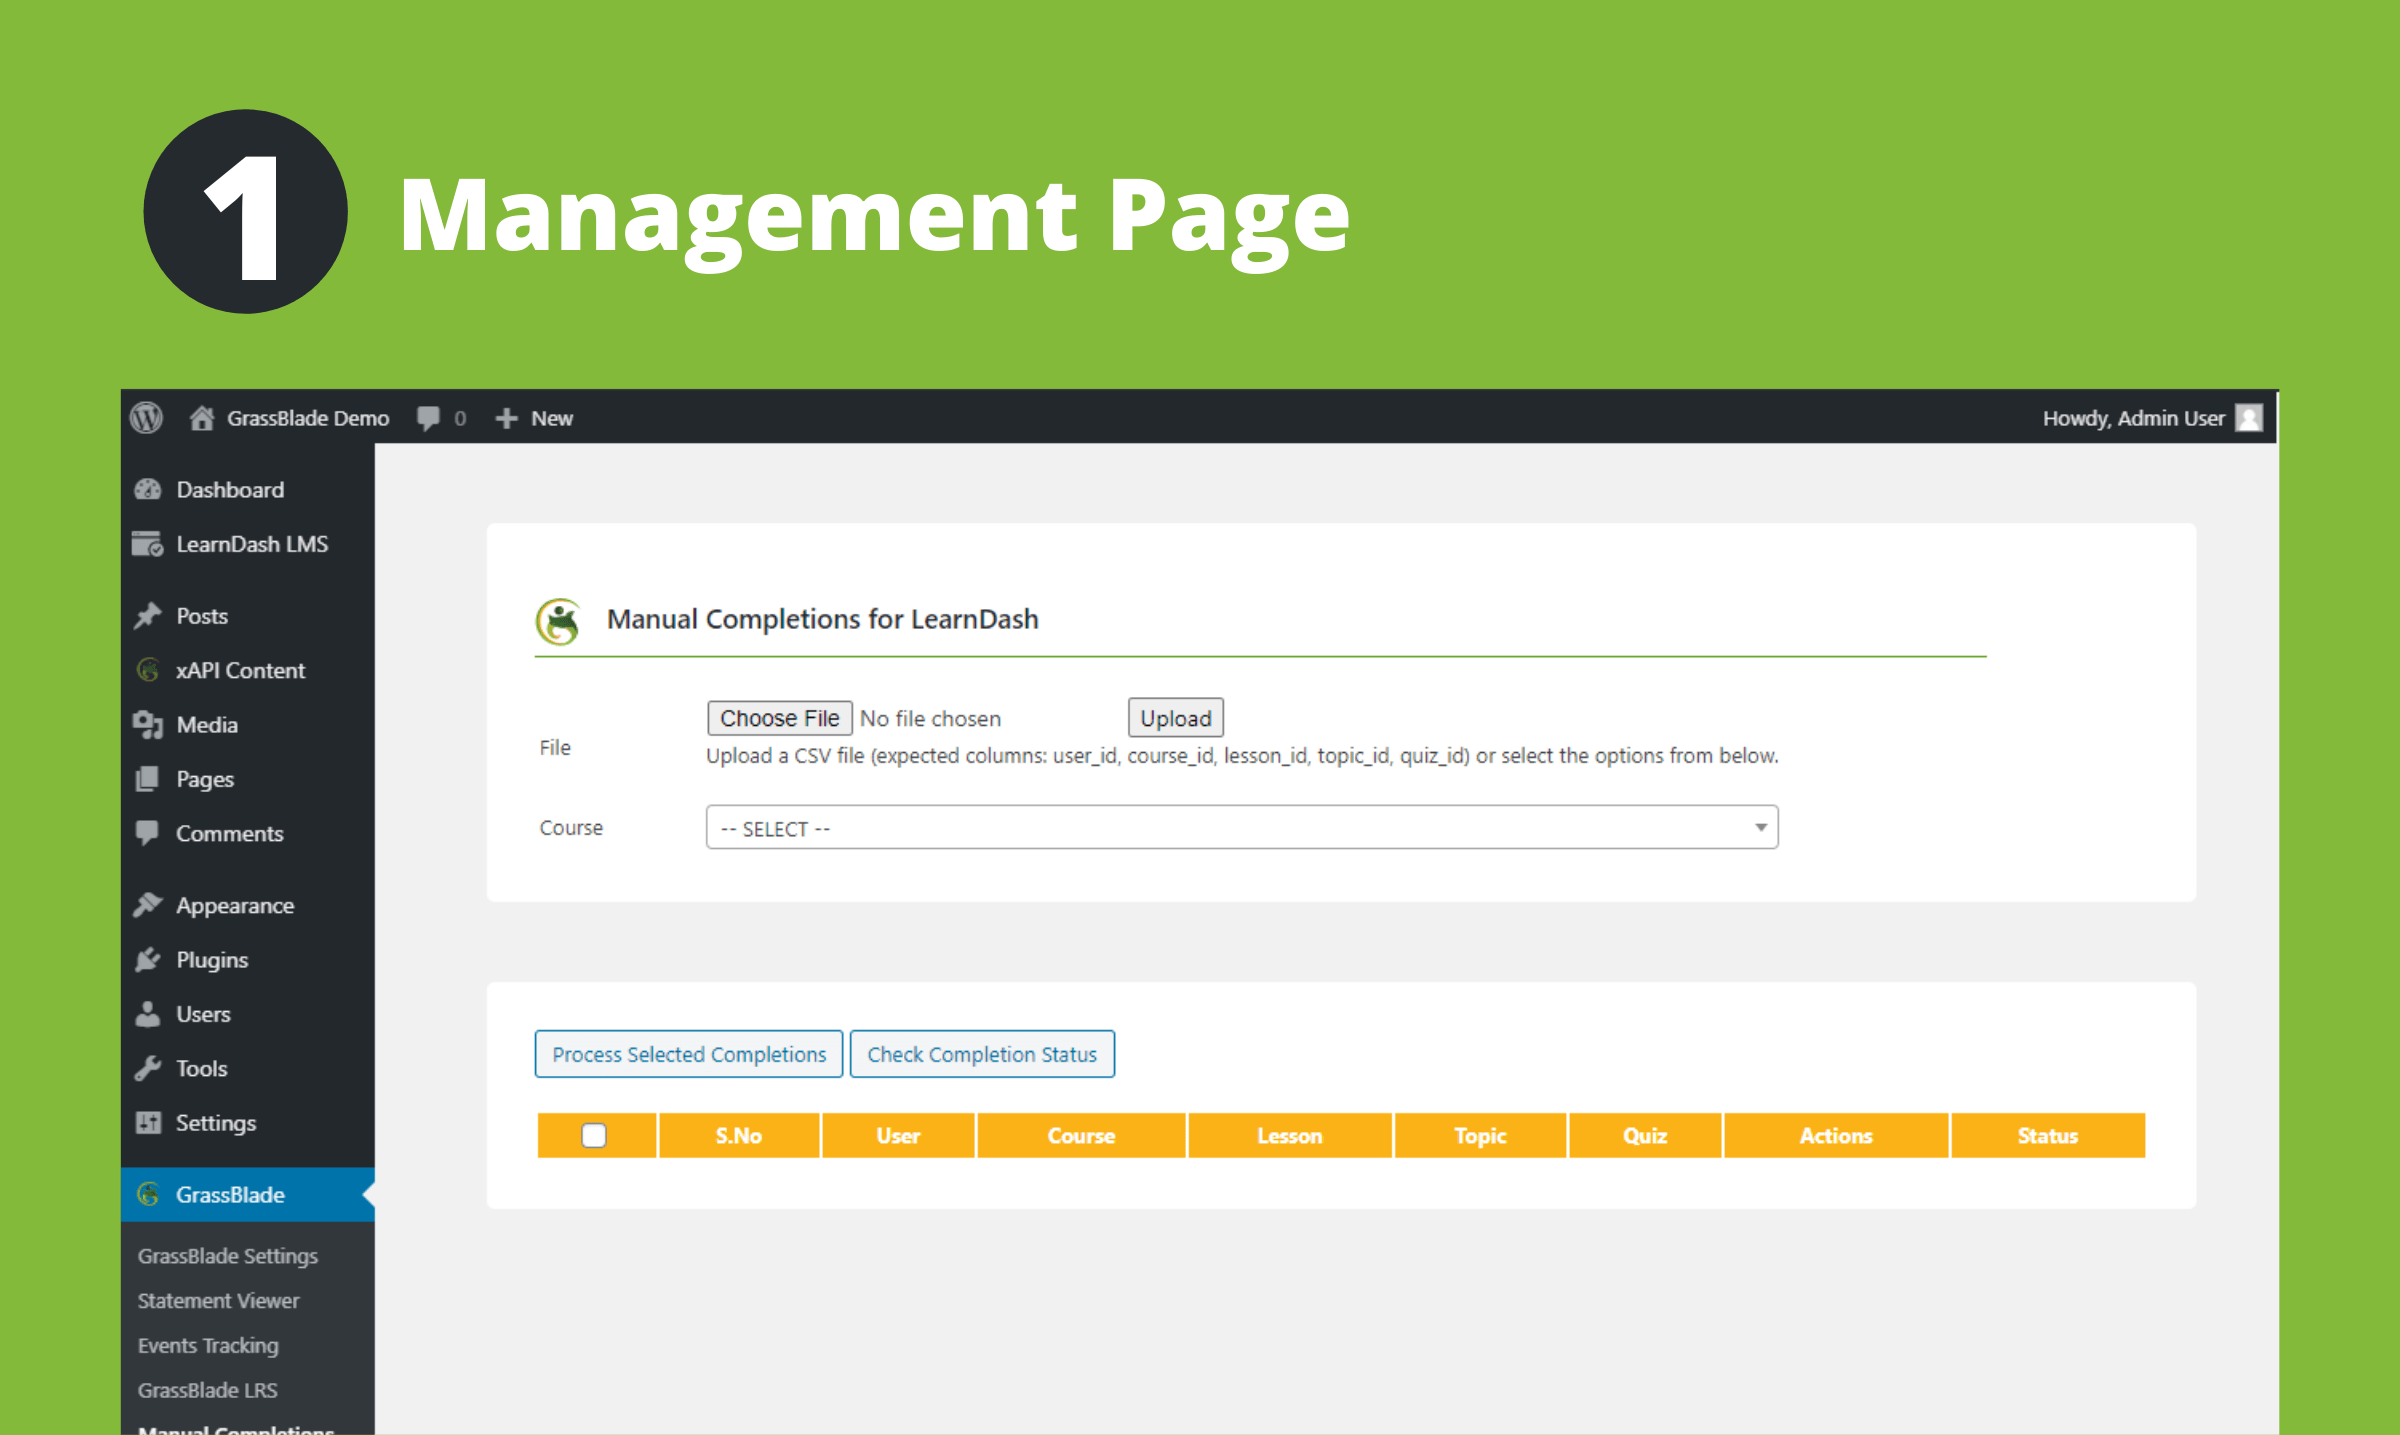 Management page